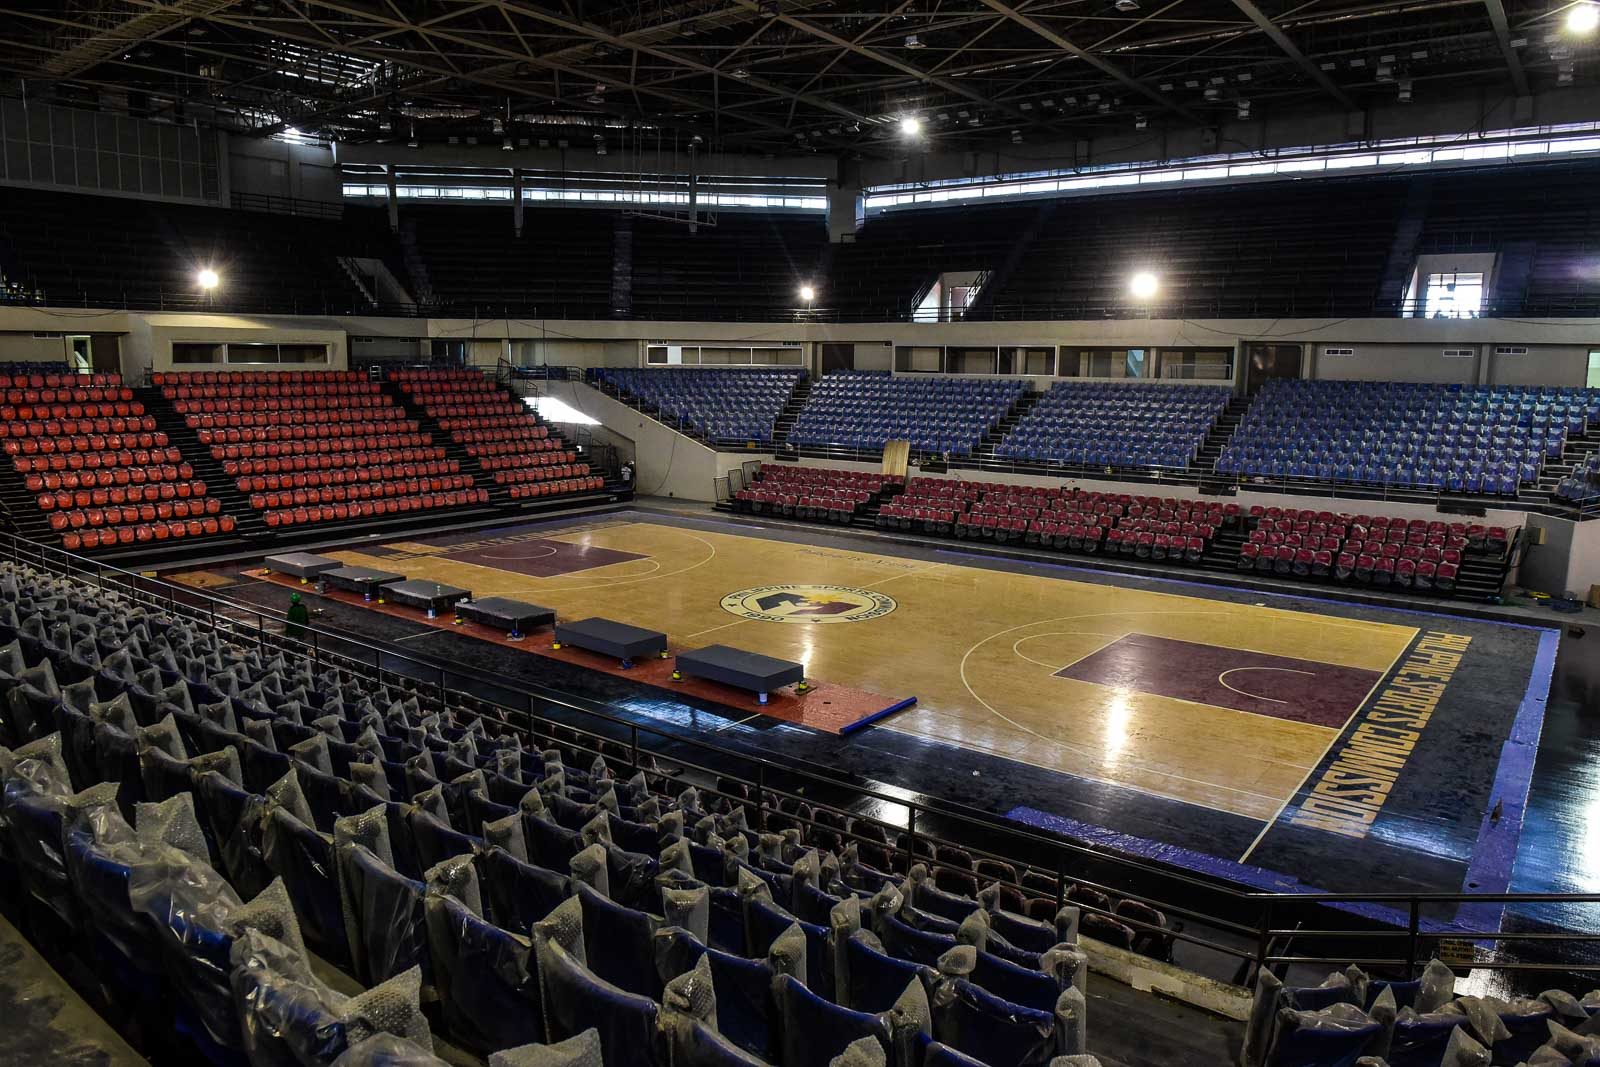 FINAL POLISH. The stadium seats, though, look brand new and the court seems ready for the final touches. Photo by LeAnne Jazul/Rappler   